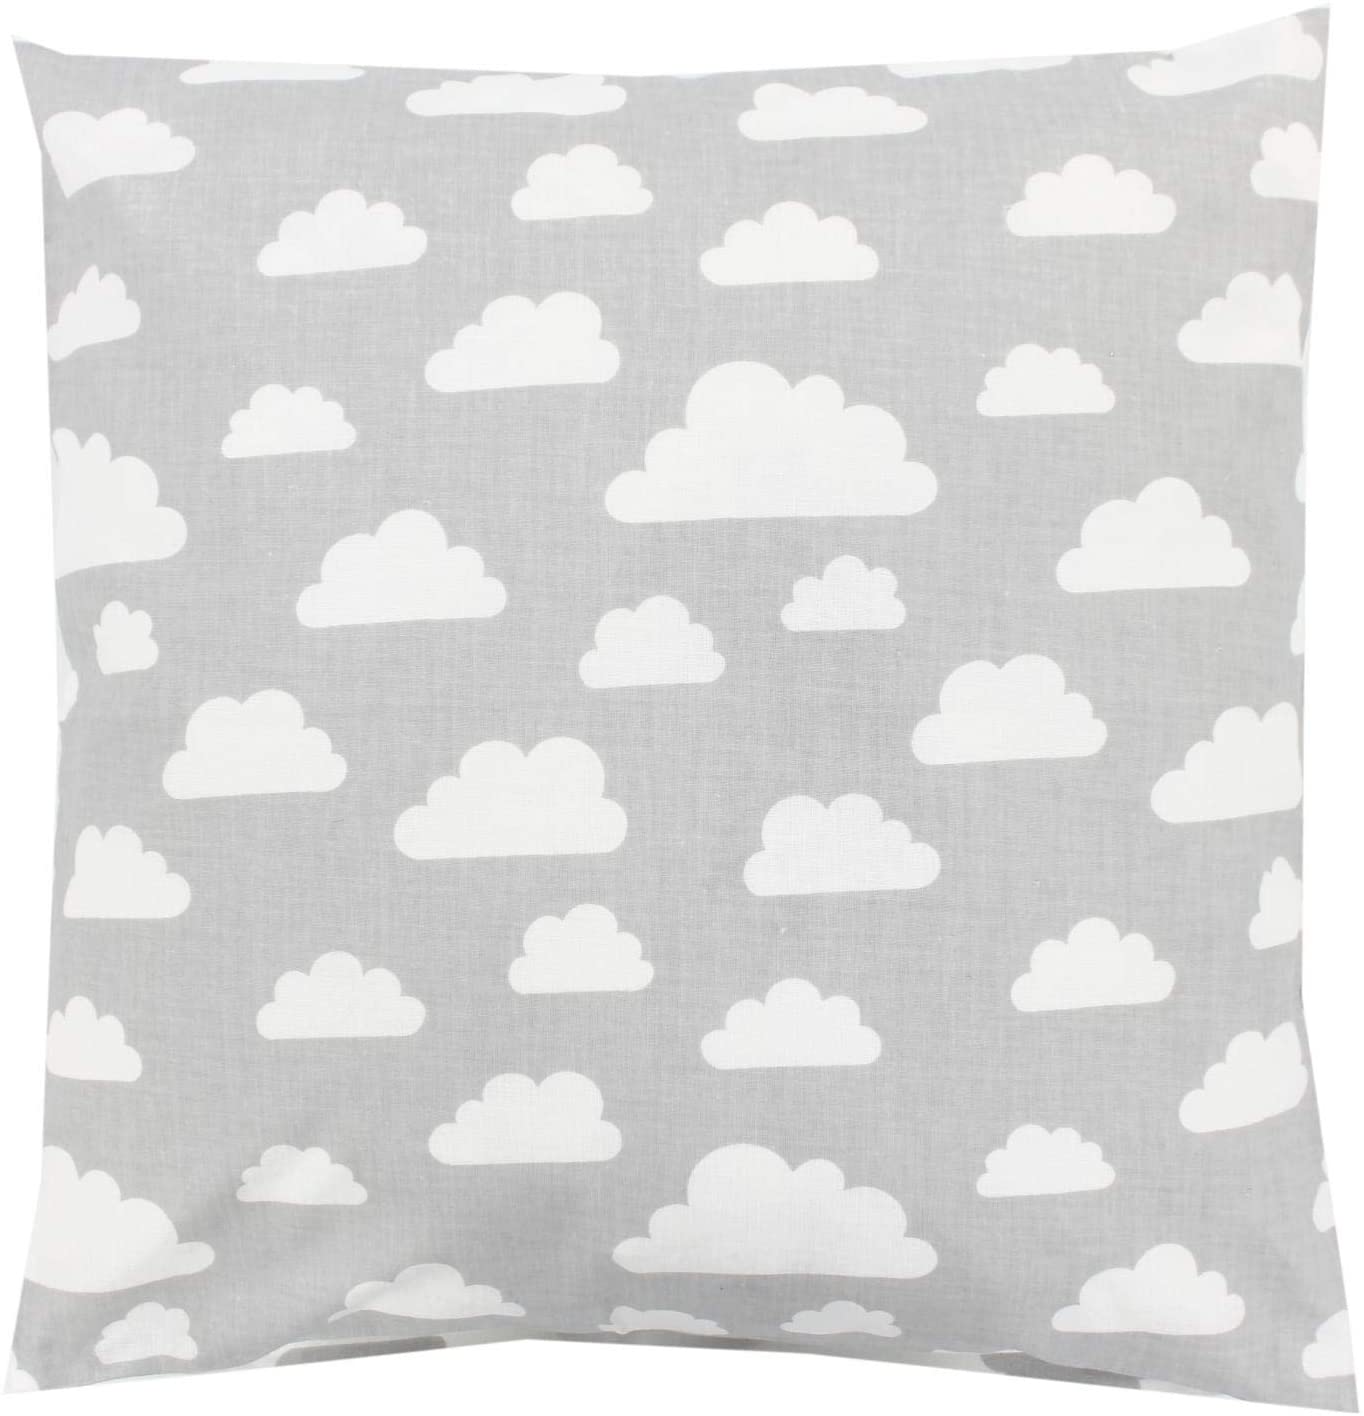 Tuptam Childrens Cushion Cover, Decorative, Patterned, Clouds, Grey/White,